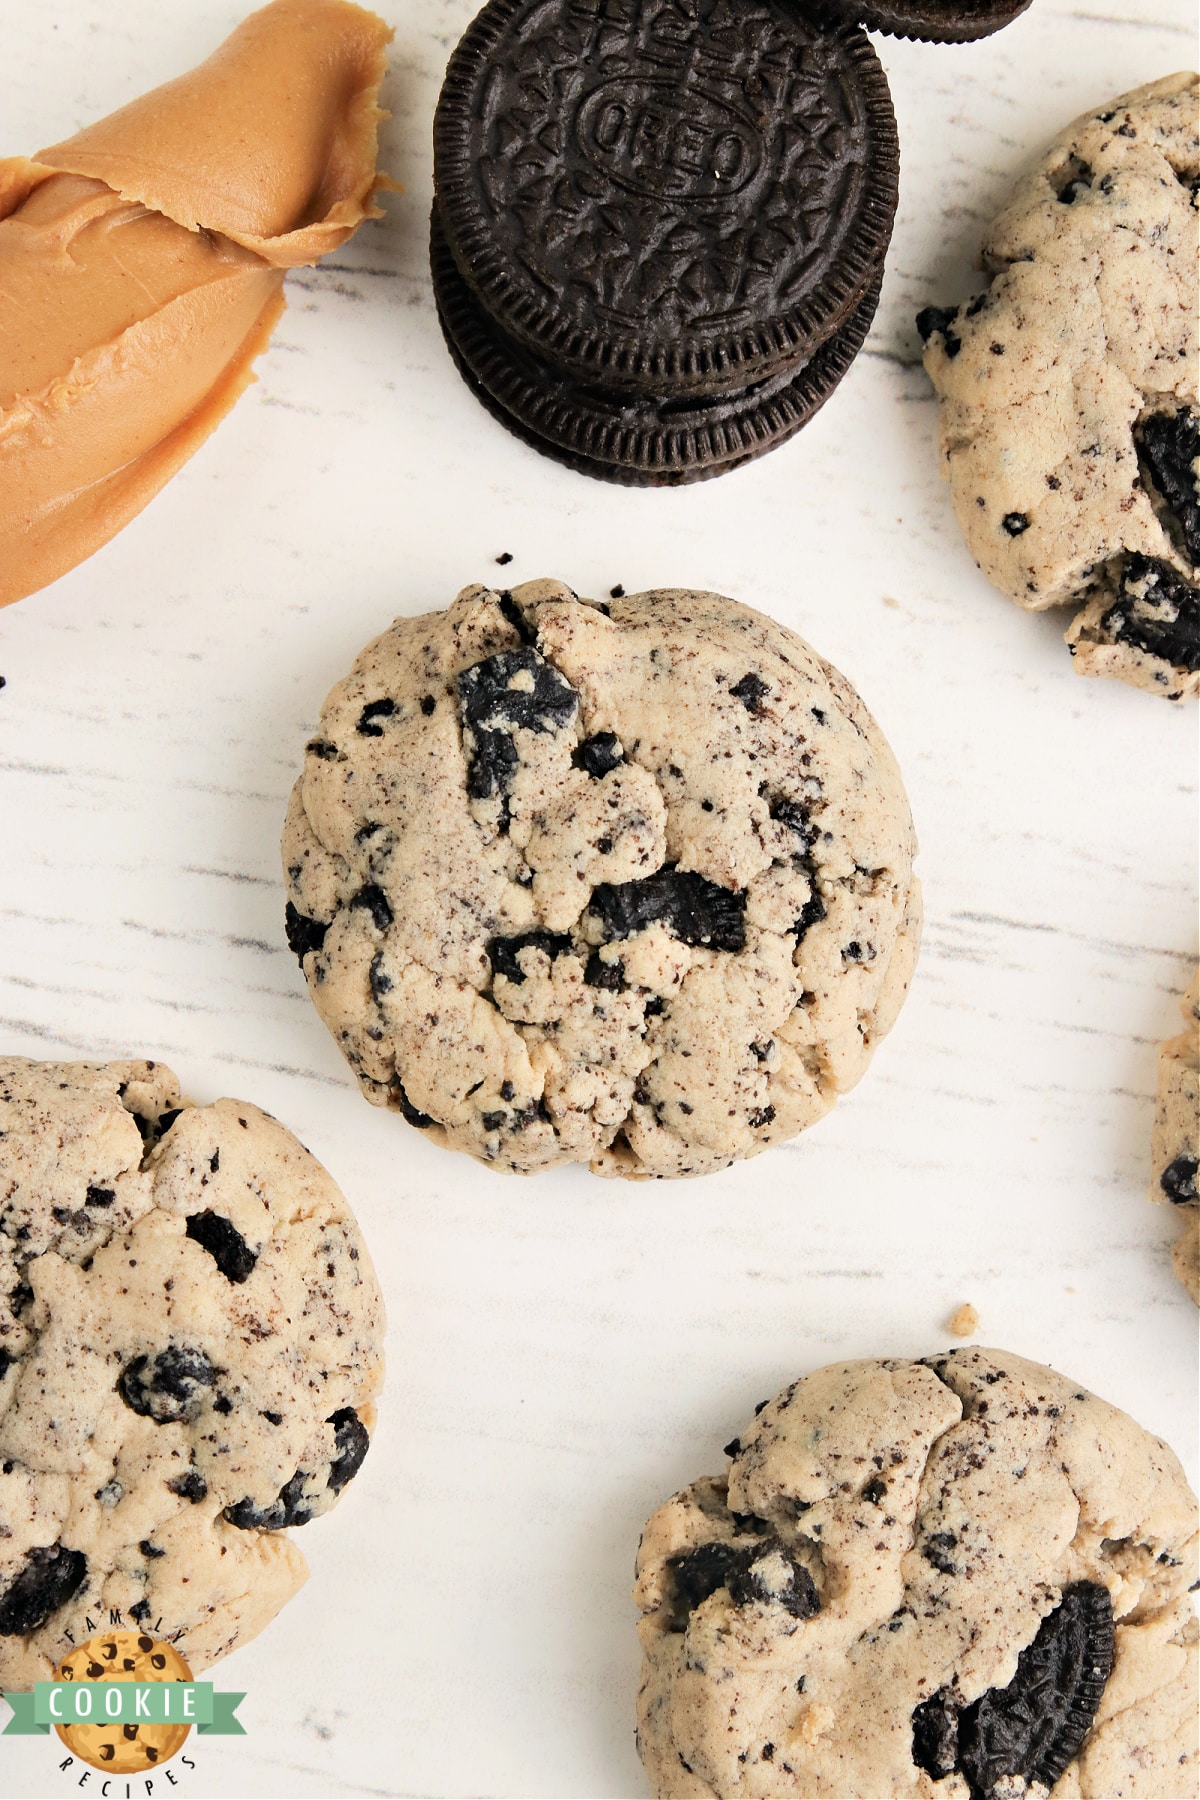 Peanut butter cookies with Oreo pudding and Oreos